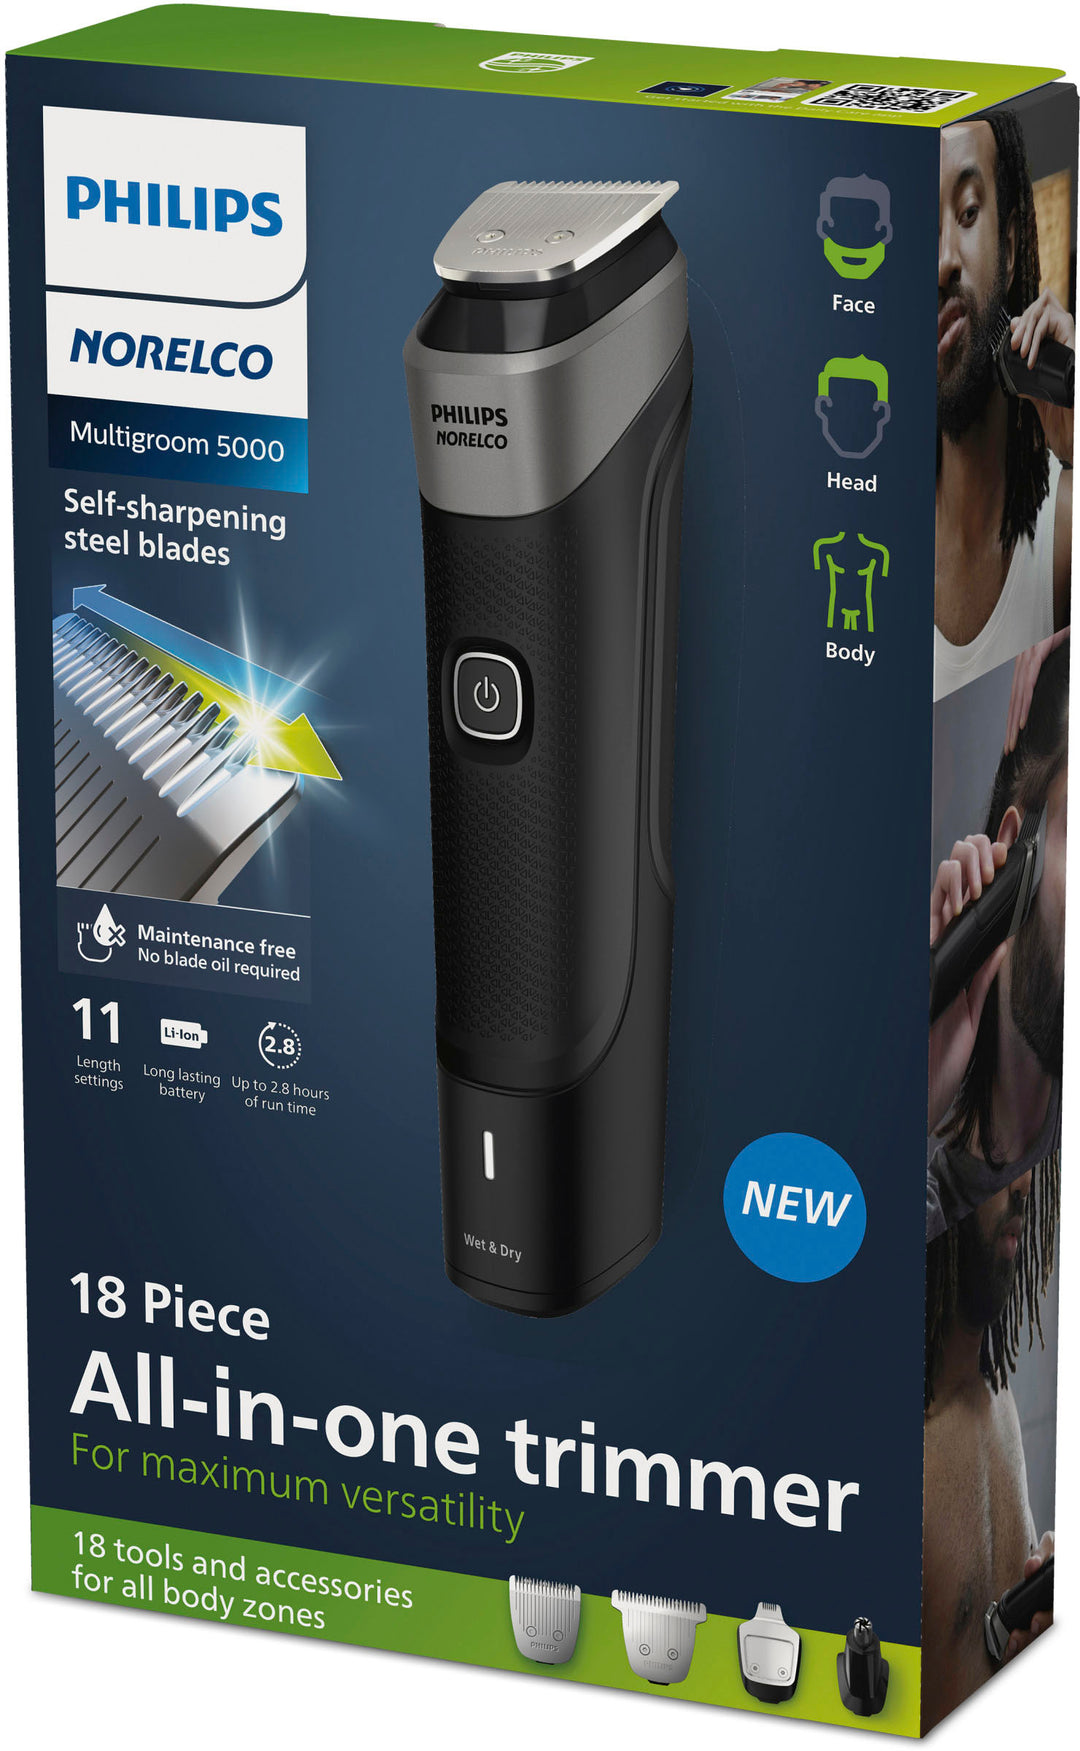 Philips Norelco Multigroom Series 5000 18 Piece, Beard Face, Hair, Body Hair Trimmer for Men - MG5910/49 - Silver_8